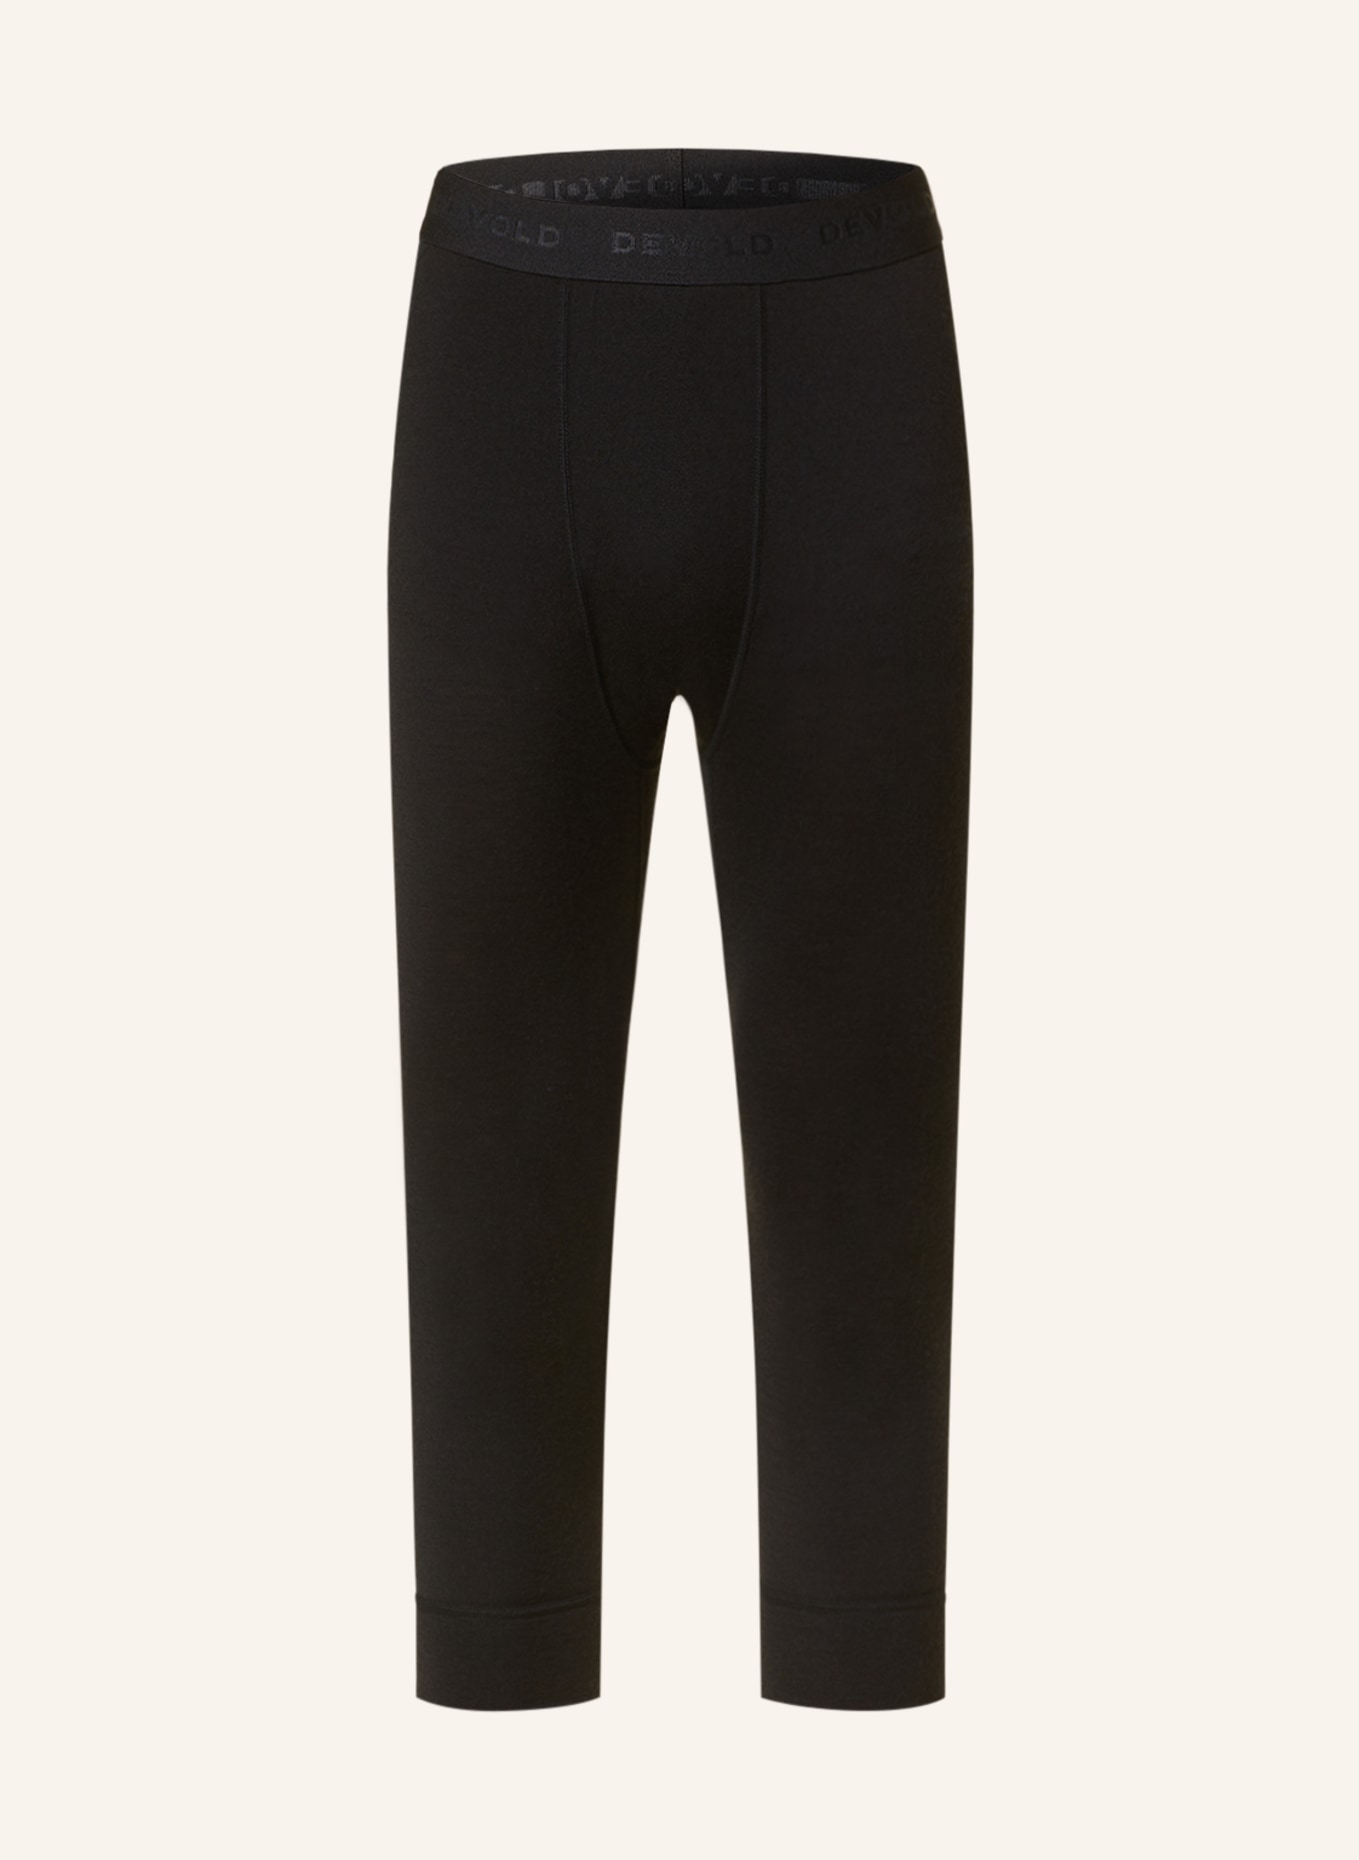 DEVOLD Functional underwear pants JAKTA in merino wool and with cropped leg length, Color: BLACK (Image 1)